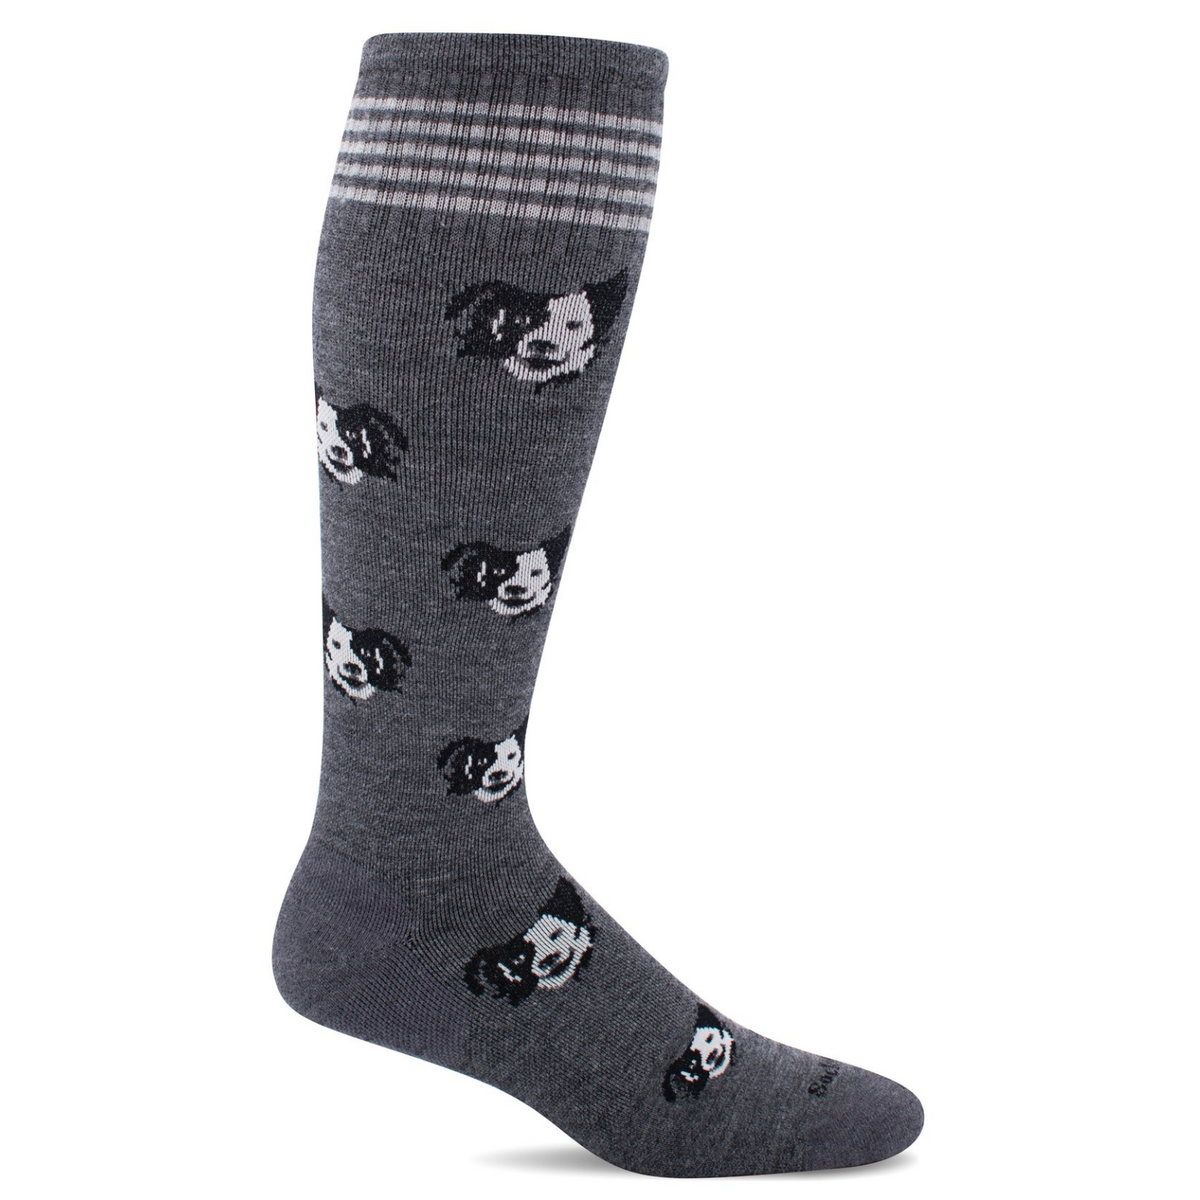 Sockwell Canine Cuddle moderate graduated compression (15-20 mmHg) women&#39;s sock featuring gray knee high with dog faces